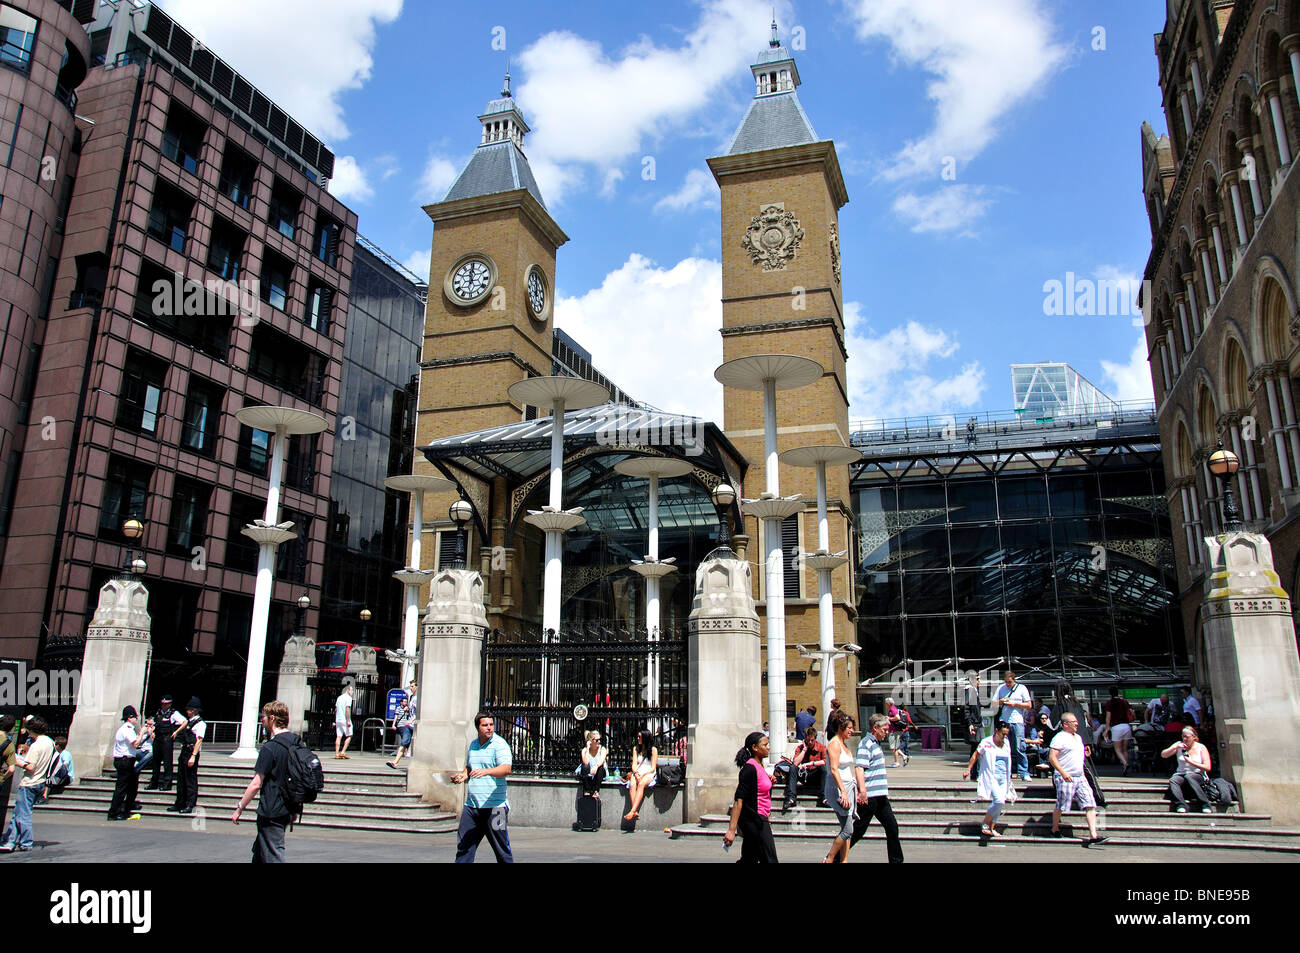 Hope Square, Liverpool Street Station, City of London, Greater London, England, Regno Unito Foto Stock